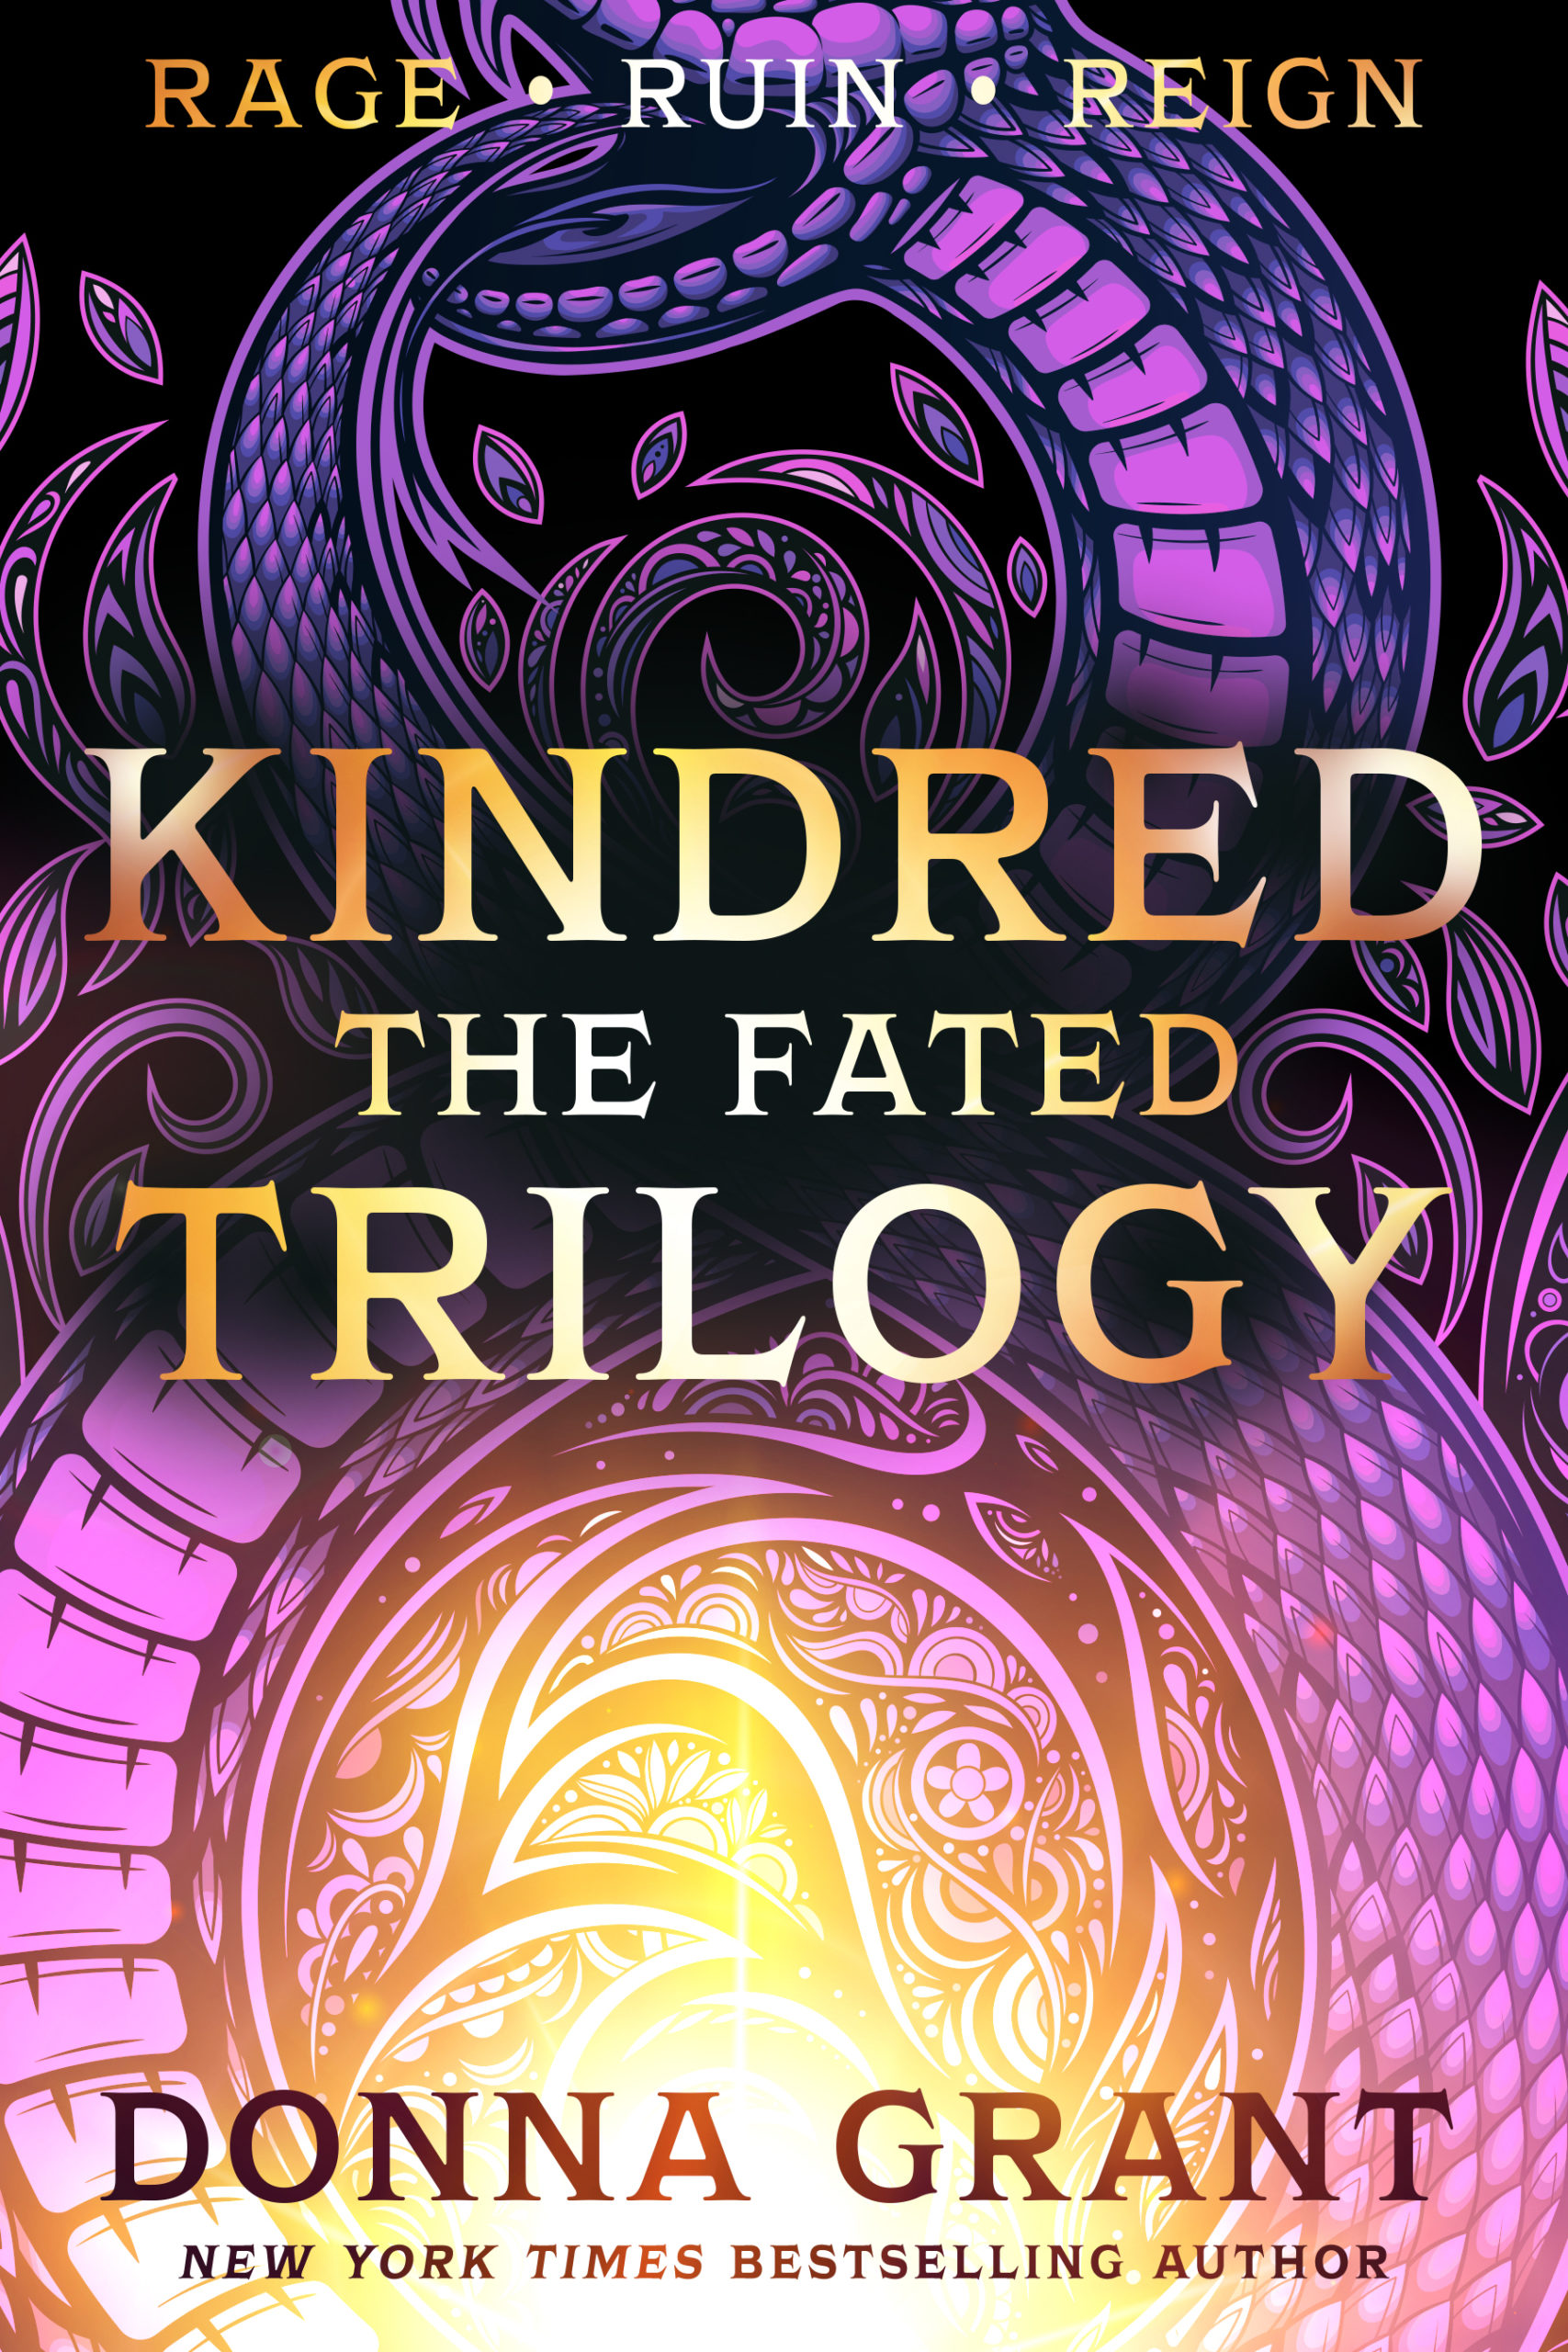 Kindred The Fated trilogy_300dpi